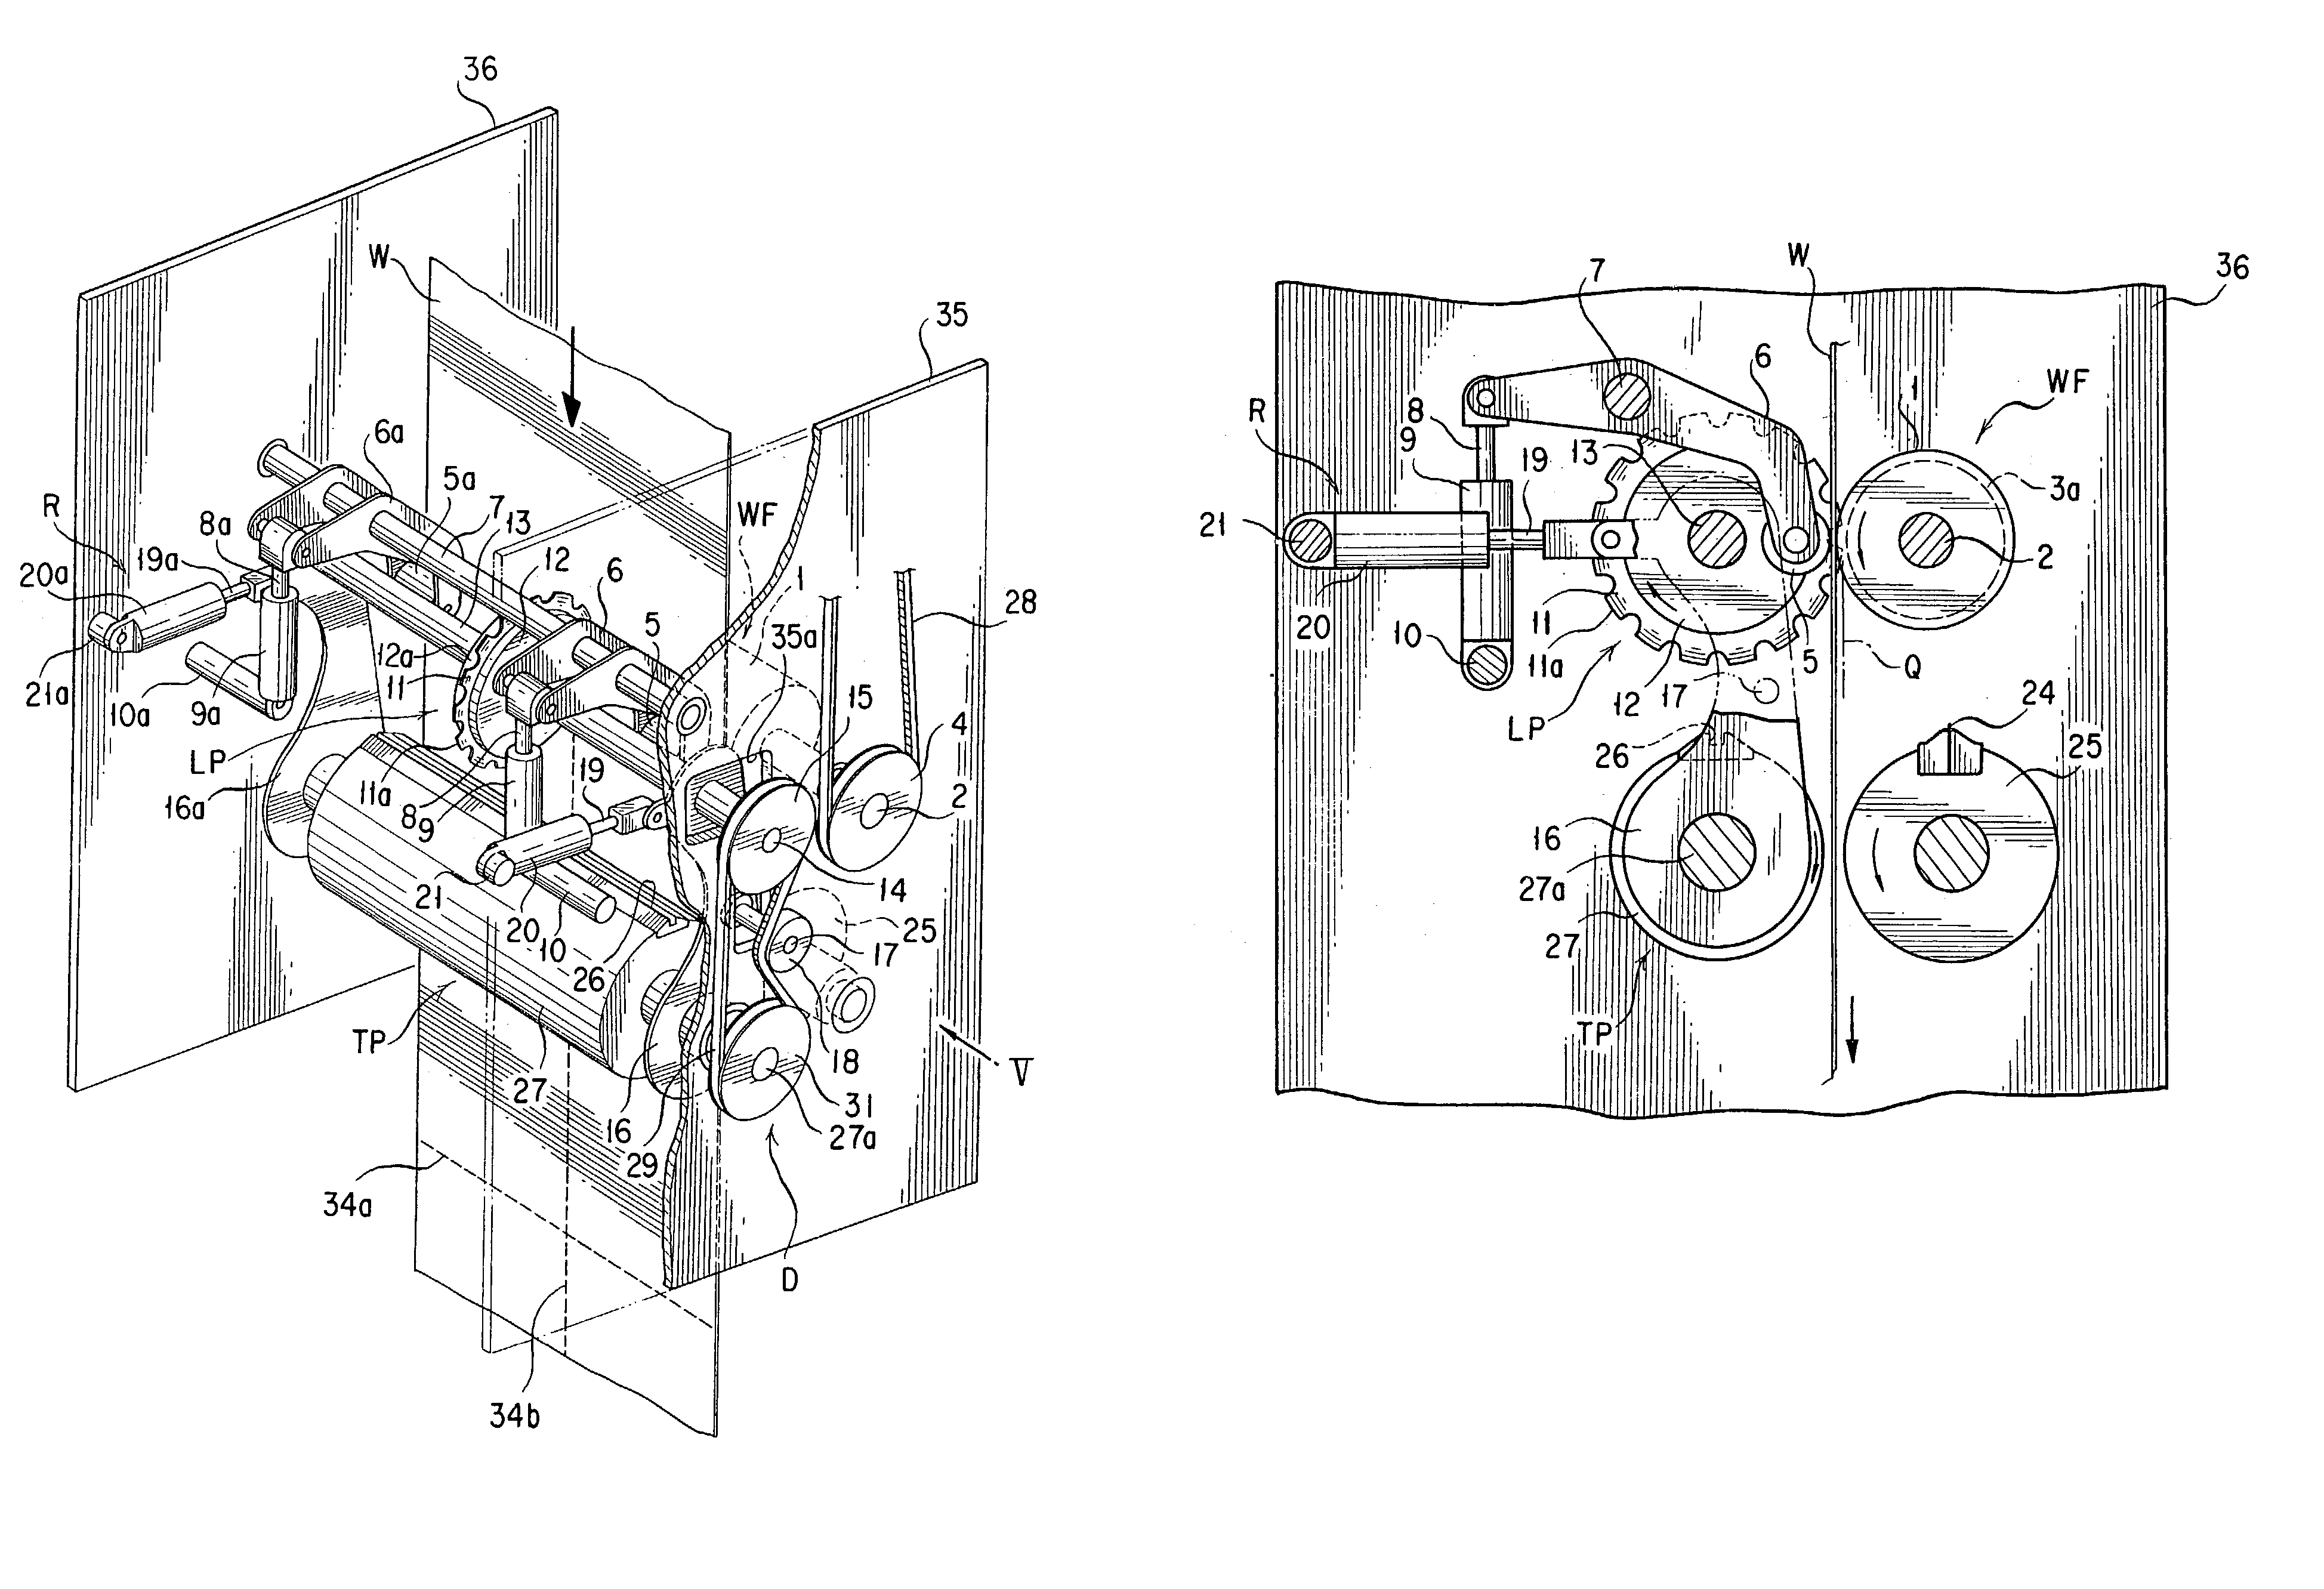 Apparatus for longitudinally perforating a web of paper in a rotary printing press